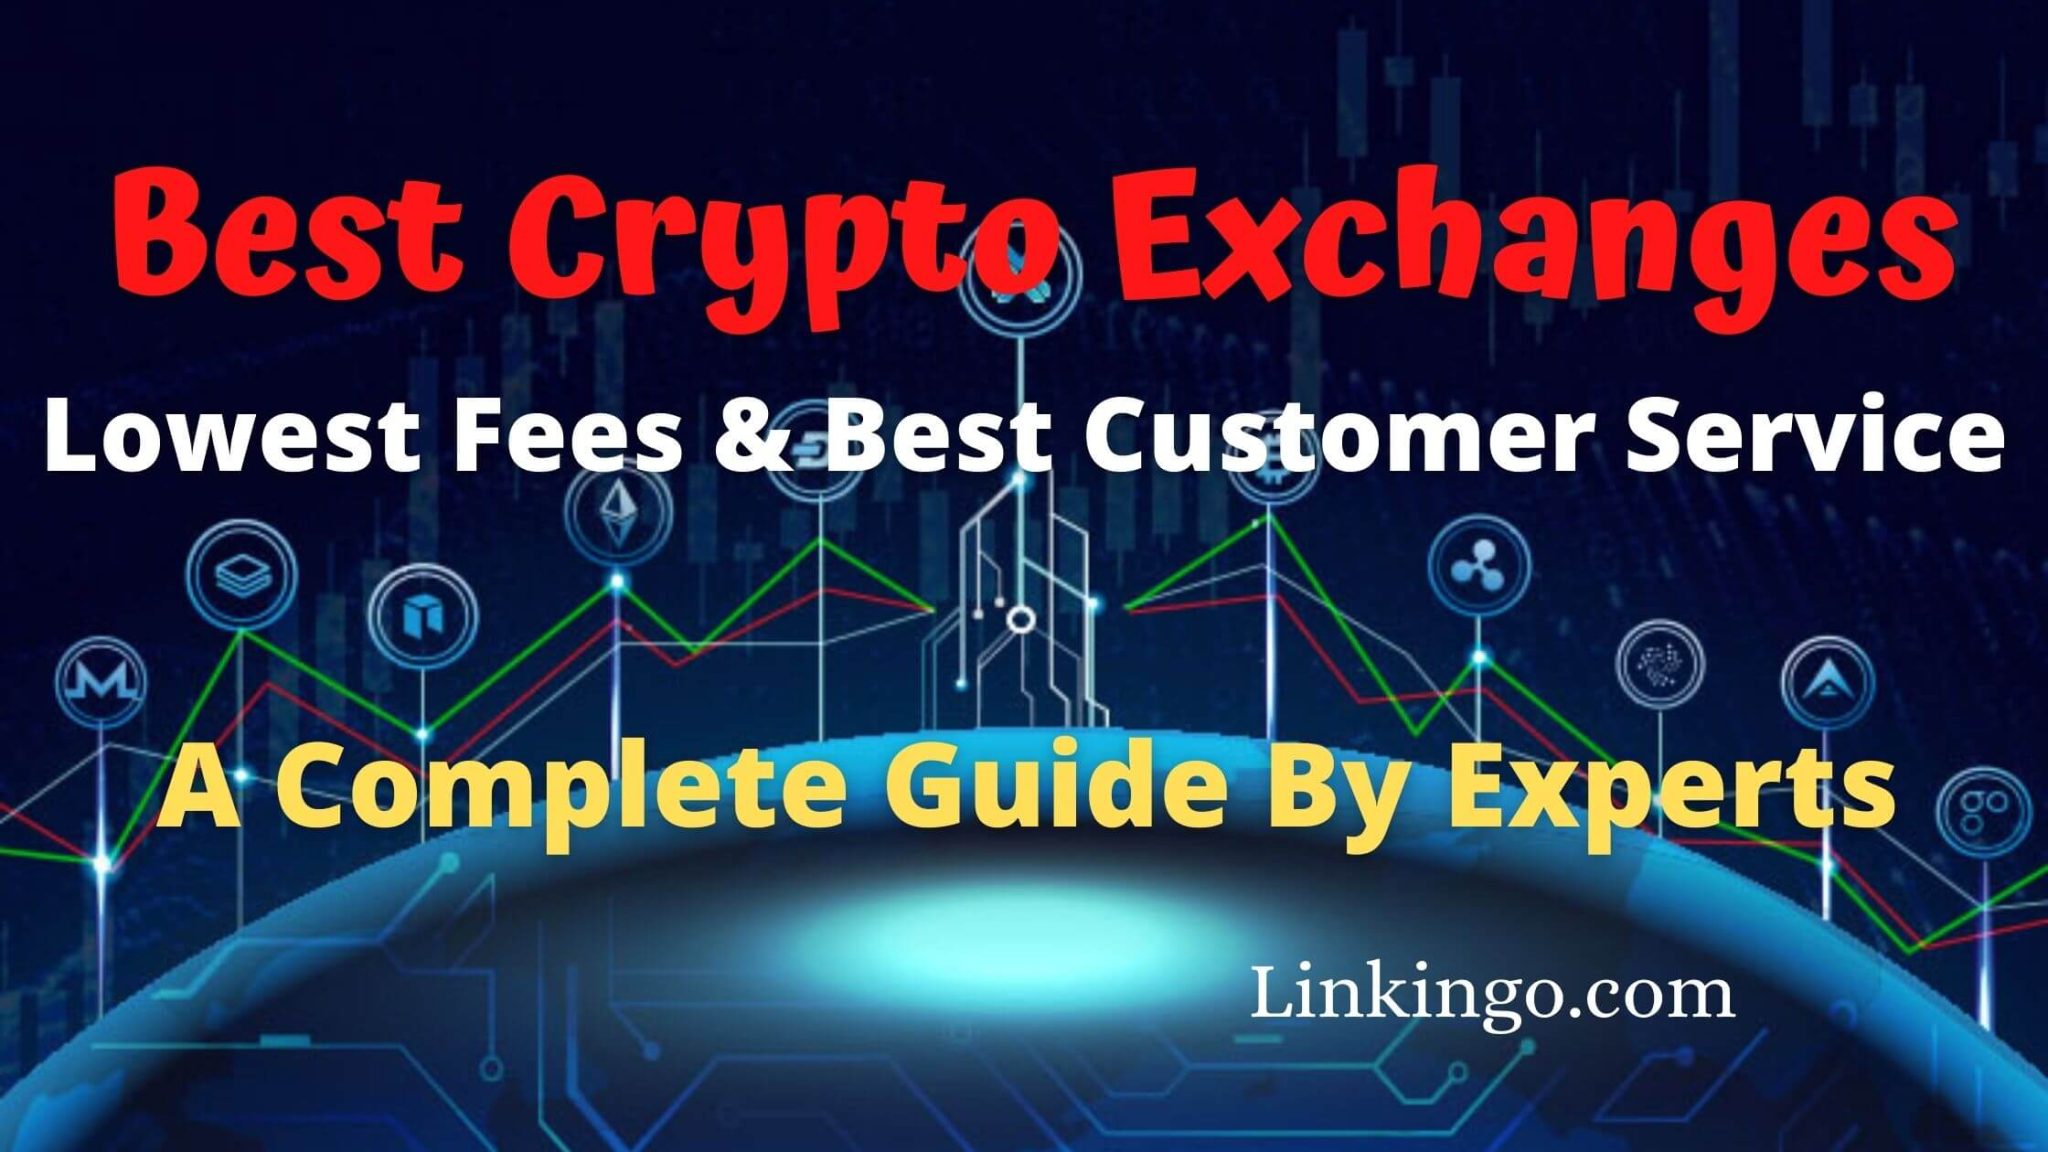 Top 5 Best Crypto Exchanges With Lowest Fees & Customer ...